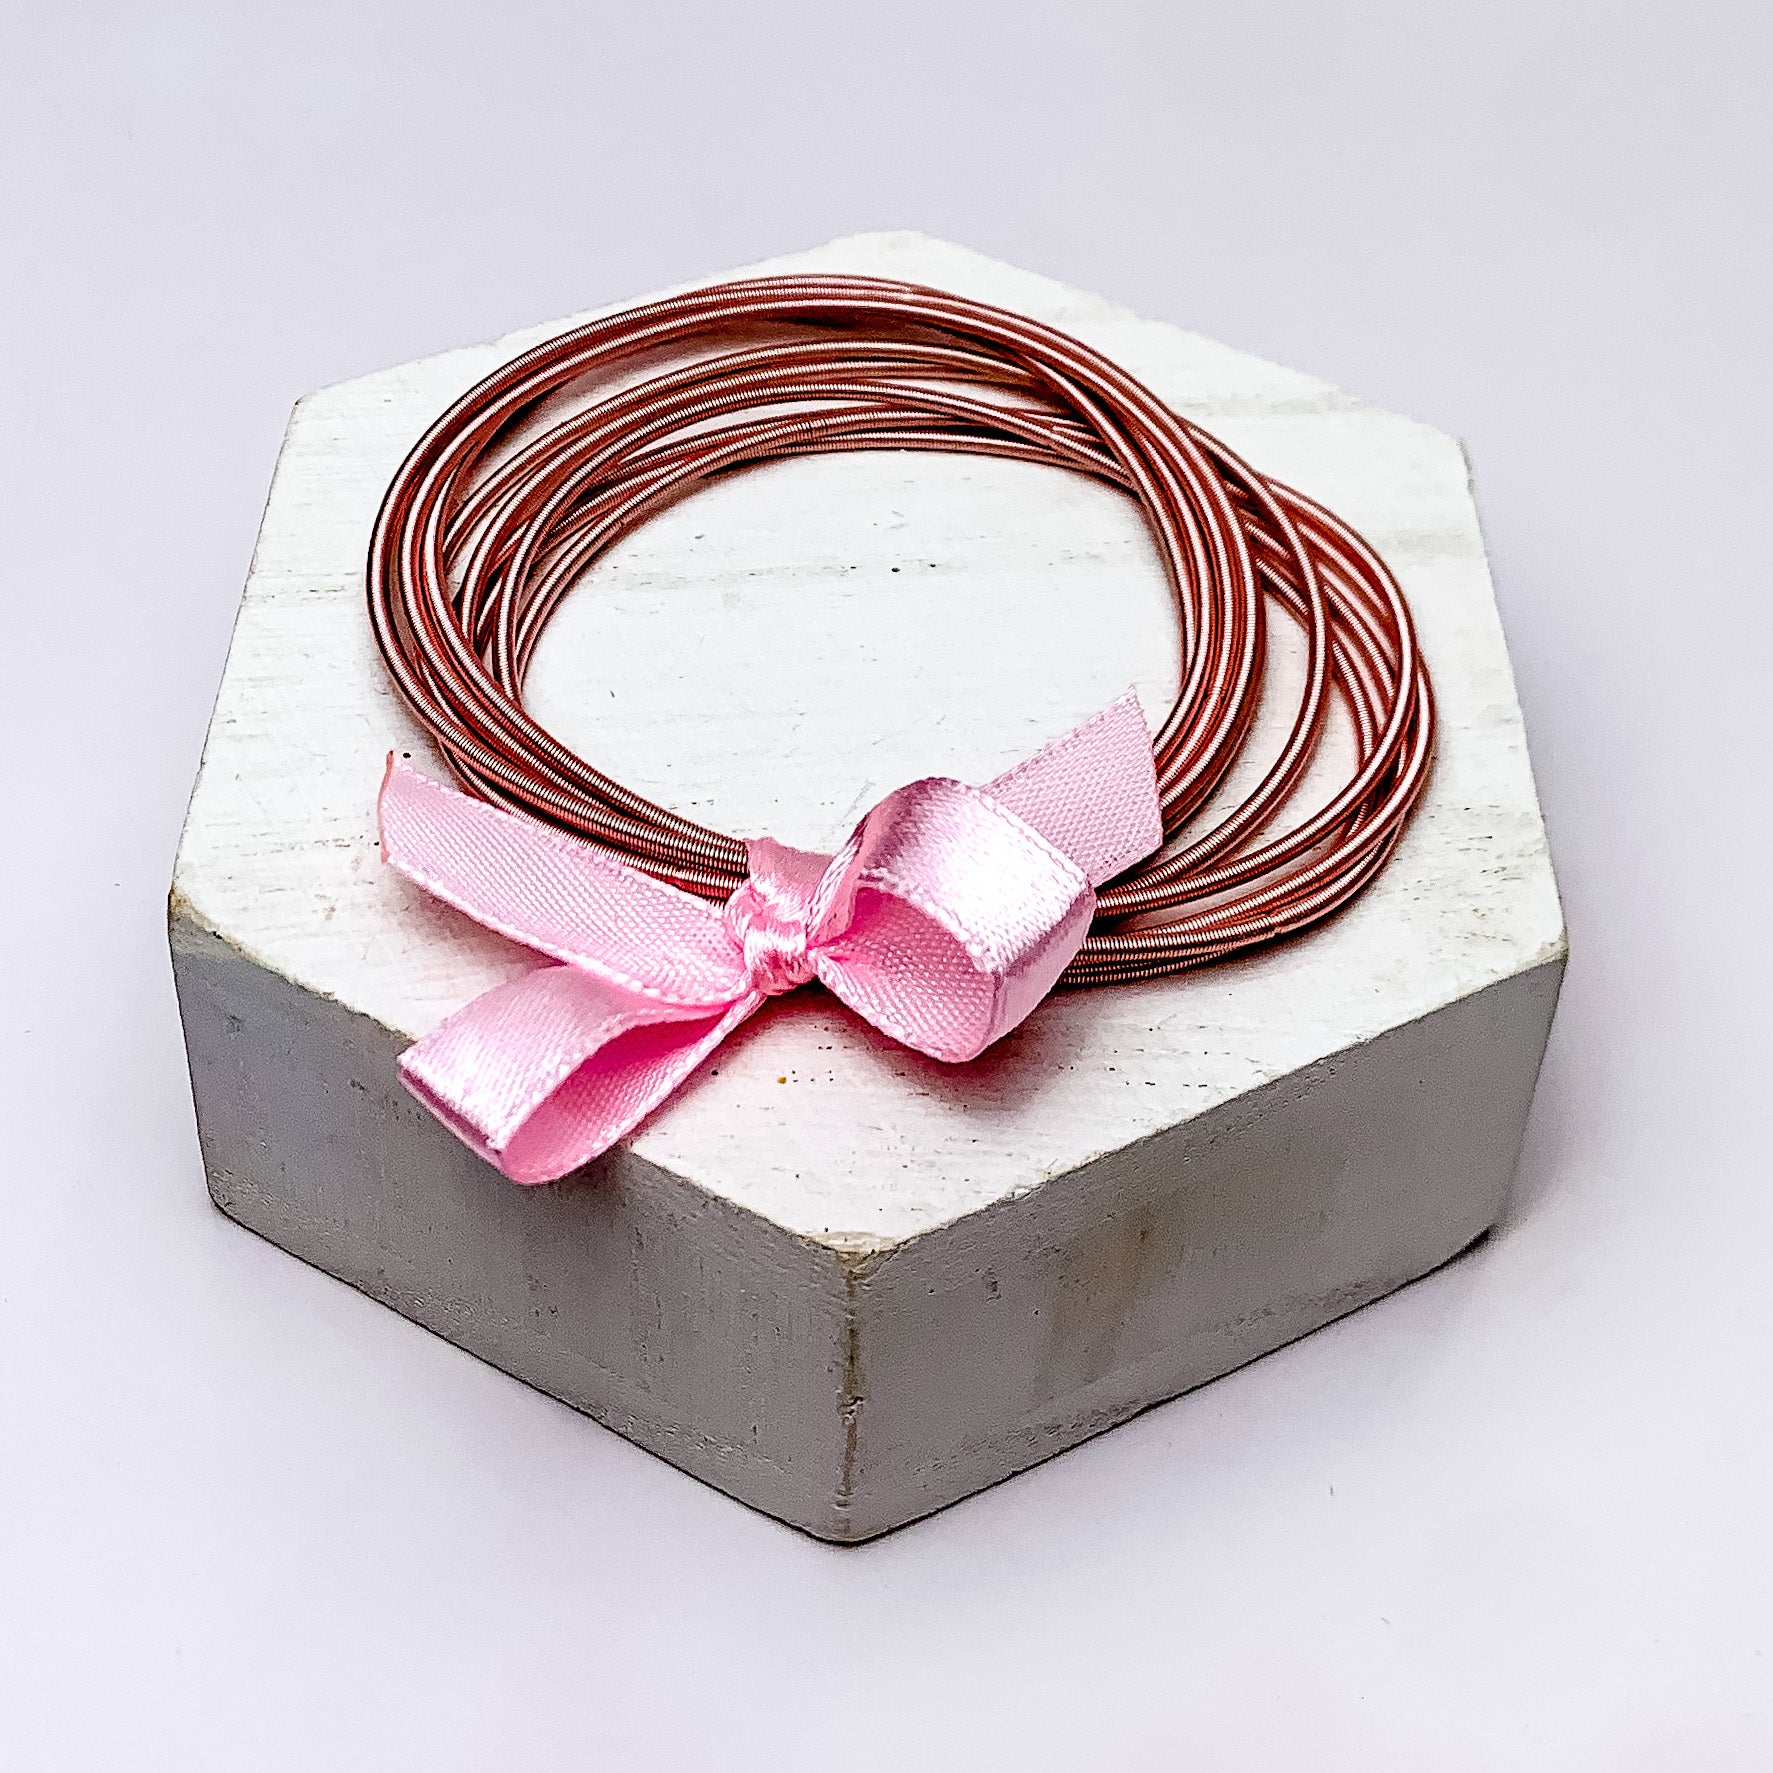 Guitar String Bracelets with Bow in Light Pink. Pictured on a white background sitting on top of a white block.